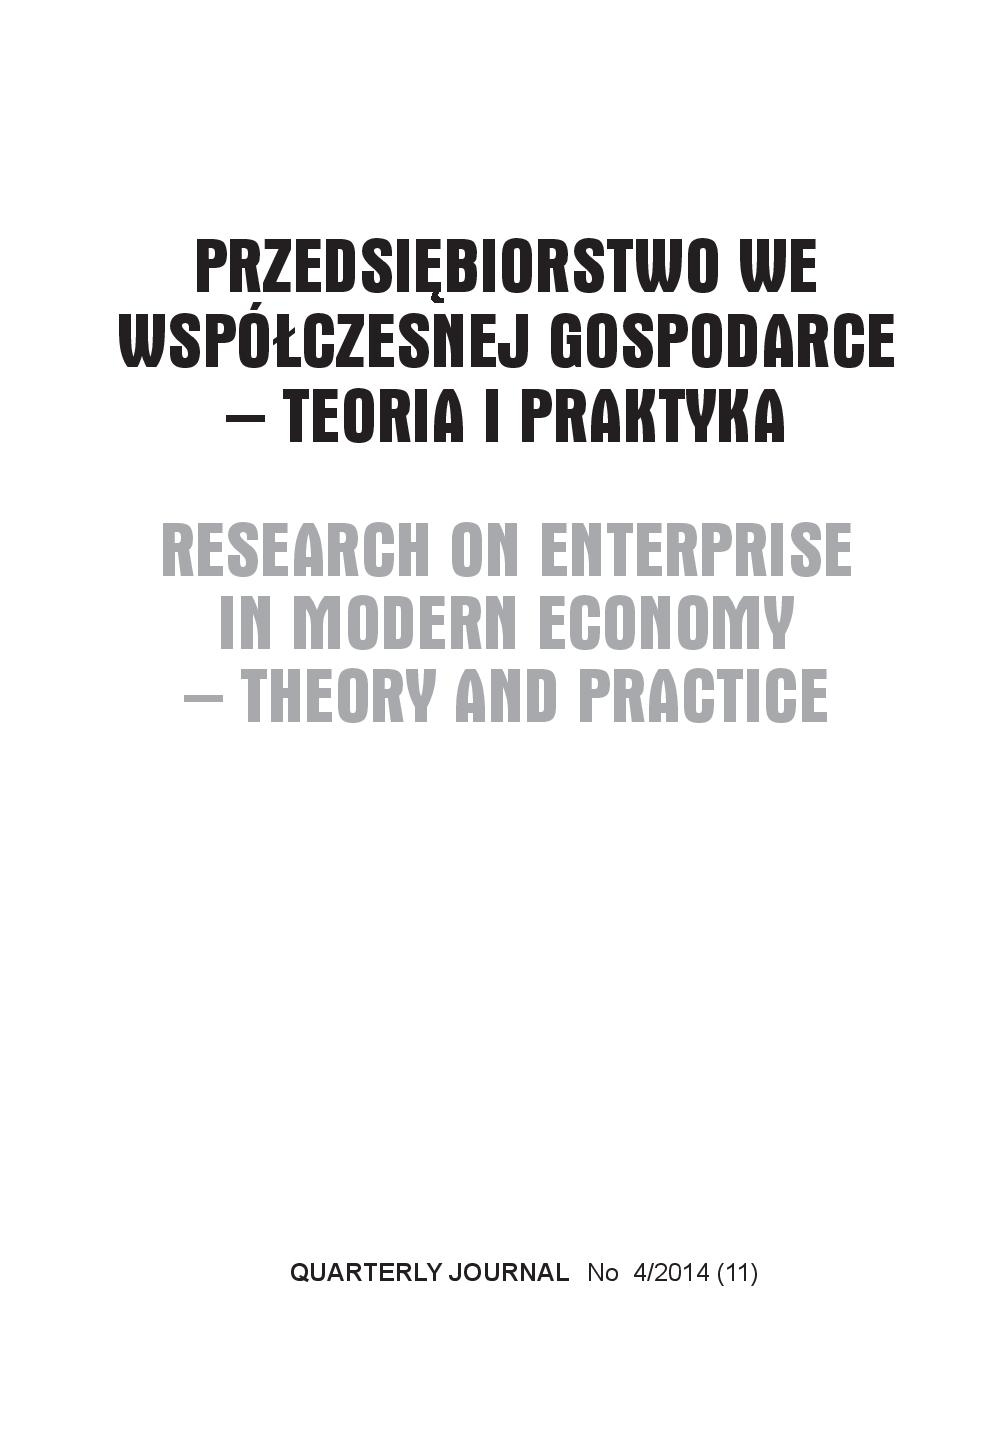 STATIC ASSESSMENT OF THE FINANCIAL LIQUIDITY OF THE ENTERPRISE – THEORETICAL ASPECTS Cover Image